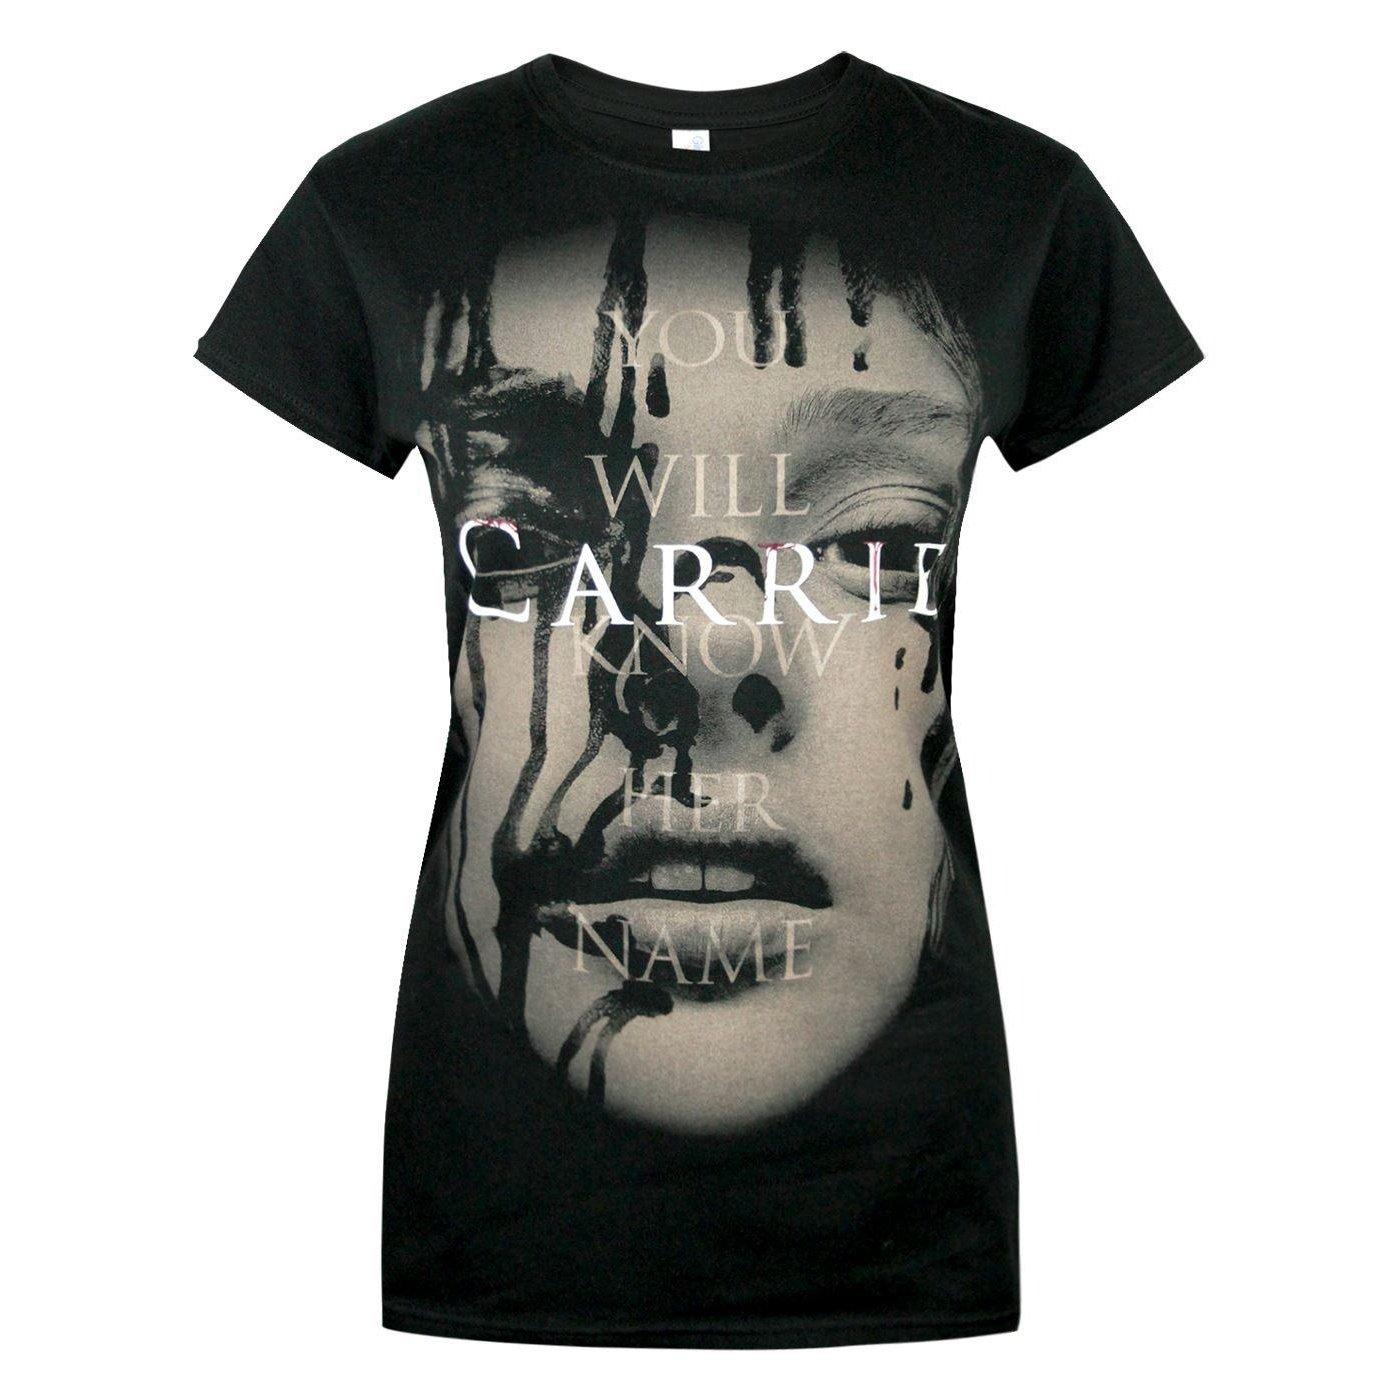 Image of Carrie The Movie 2013 TShirt - M